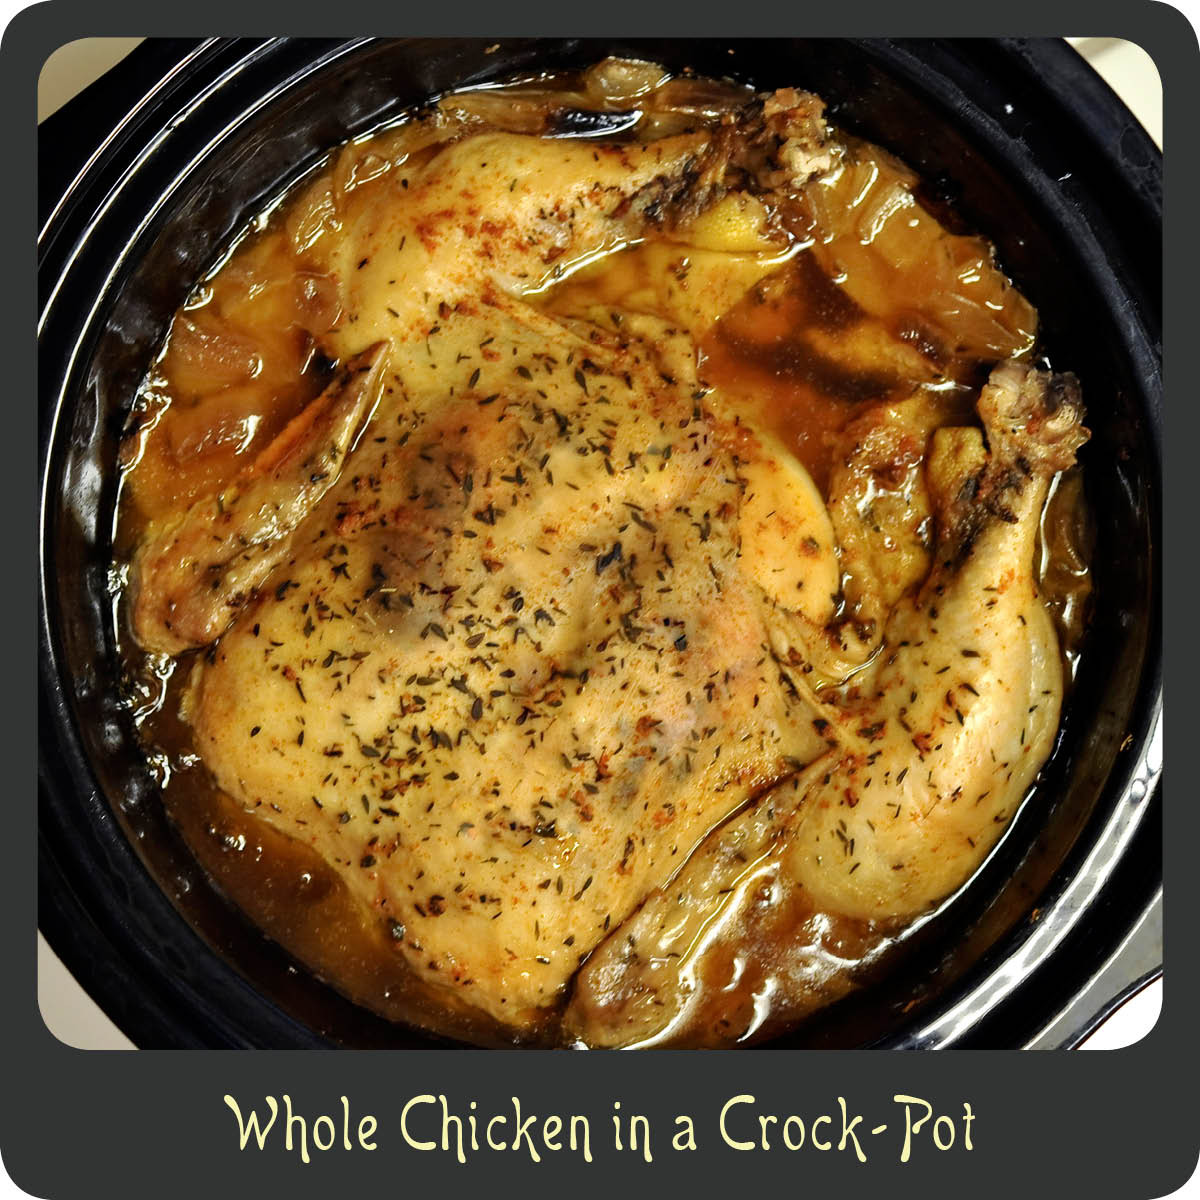 Cooking A Whole Chicken In A Crock Pot
 Recipe—Whole Chicken in a Crock Pot